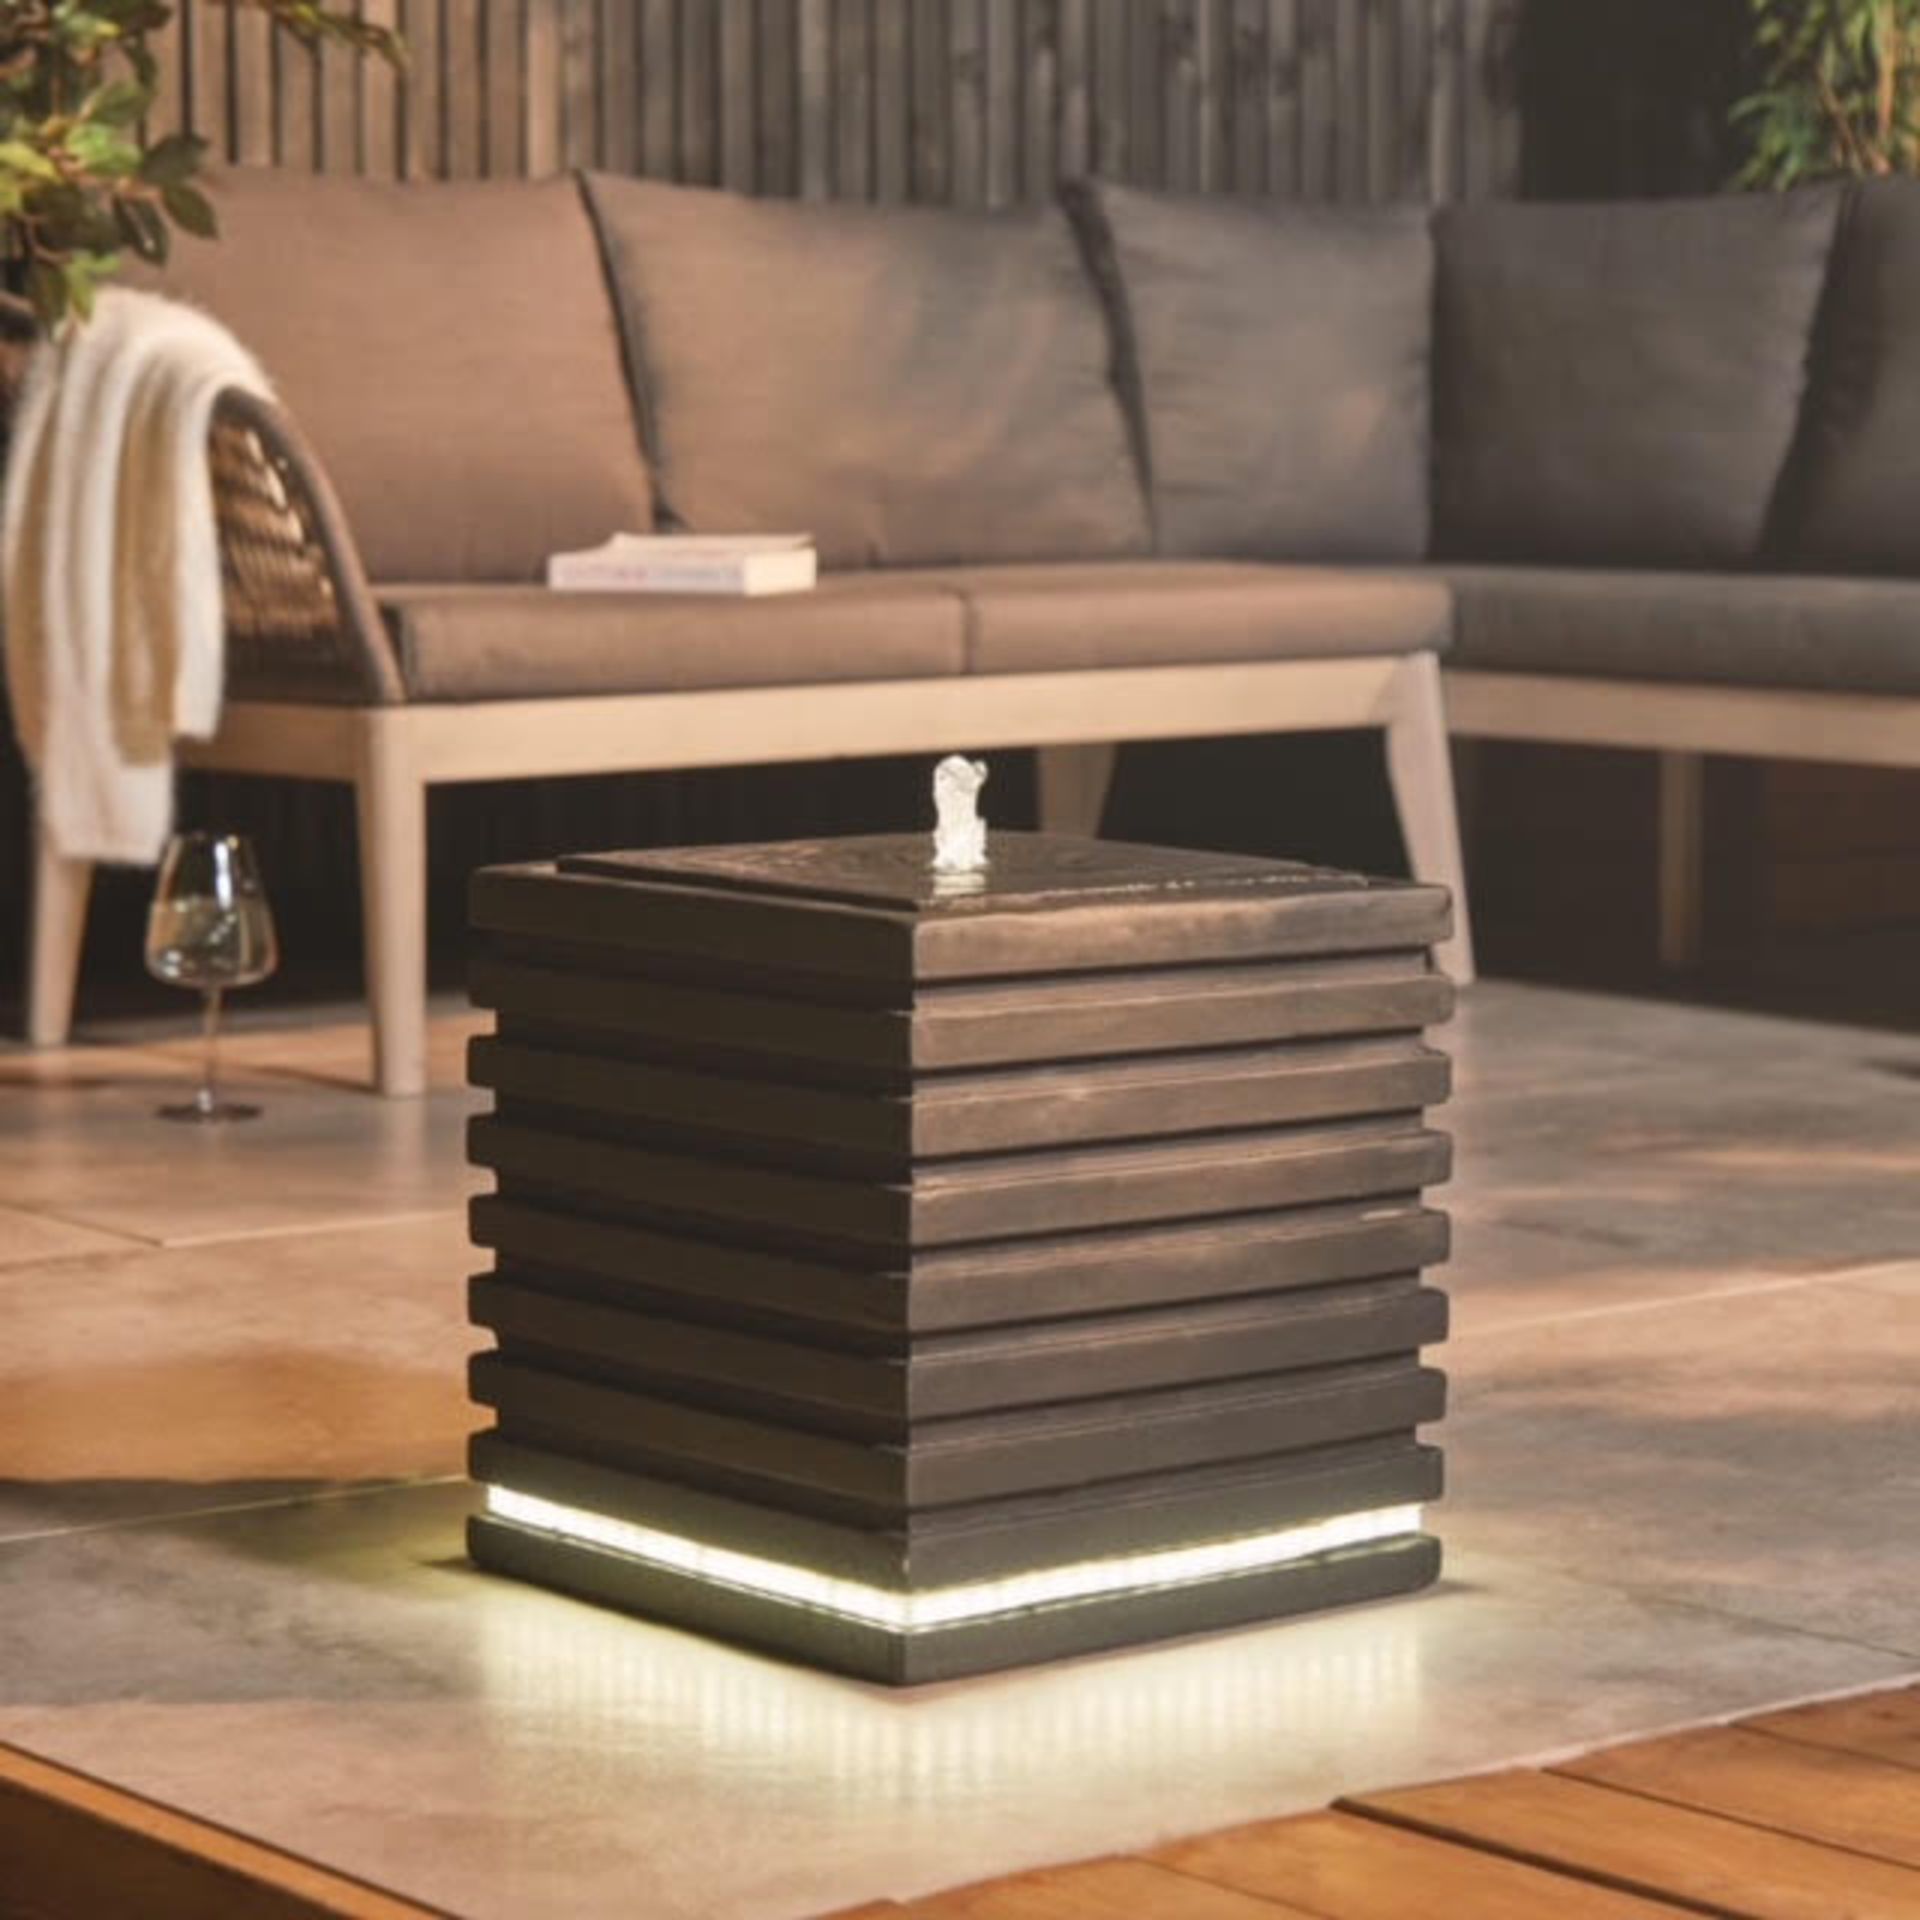 New & Boxed LED Ribbed Cube Water Feature. RRP £299.99. (REF723) Indoor/Outdoor Water Fountain